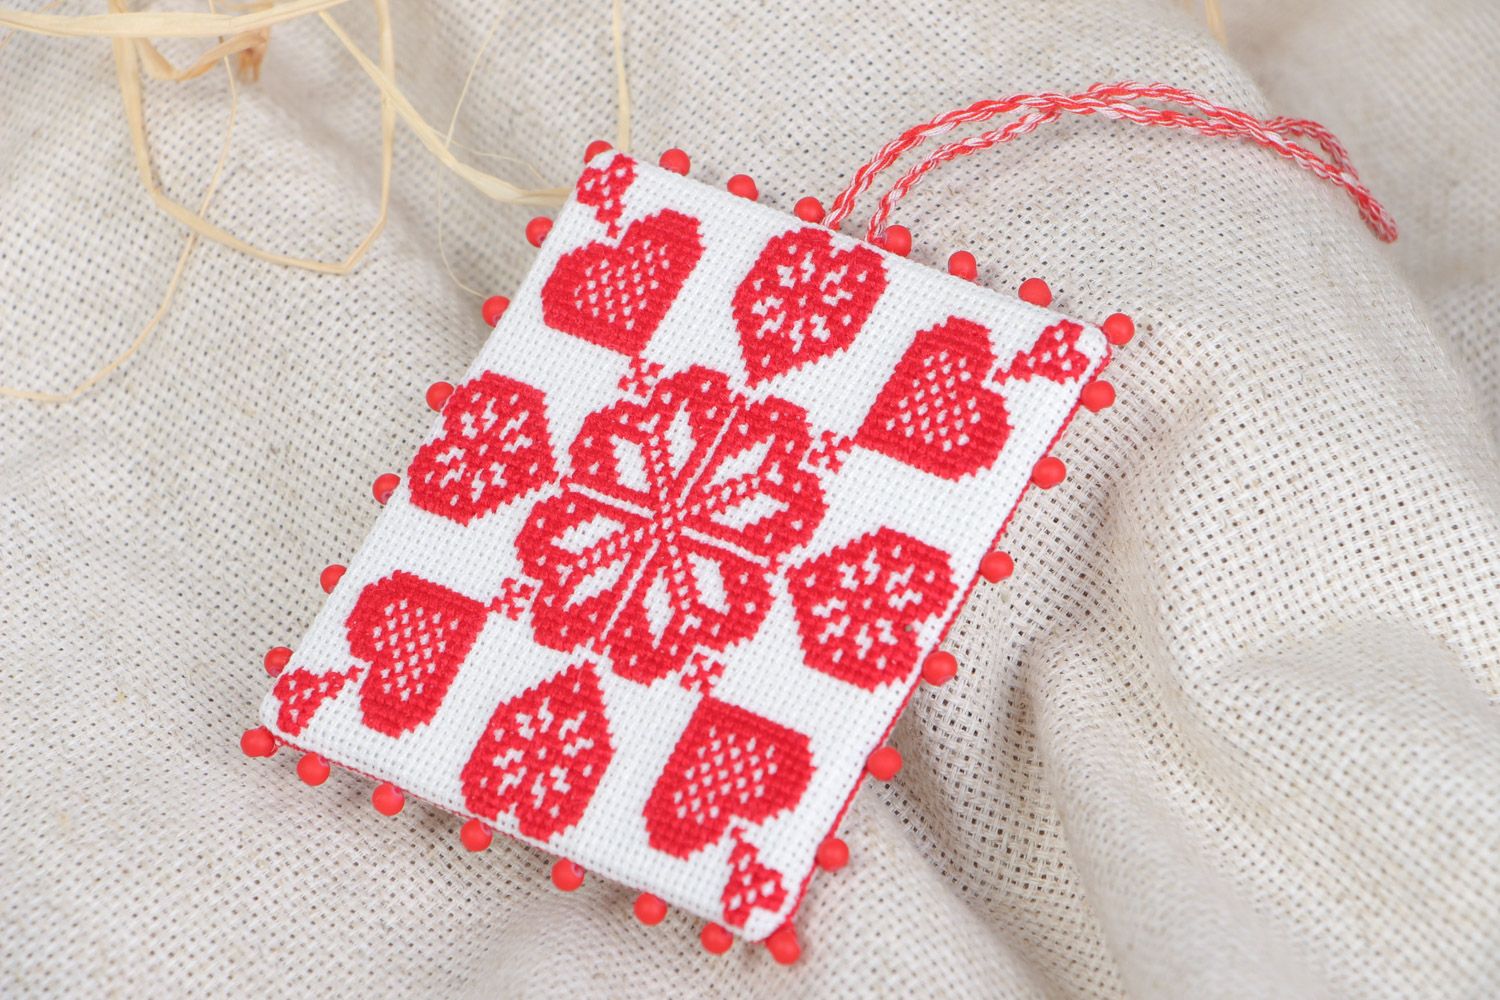 Small handmade white and red pincushion with cross stitch embroidery and eyelet photo 1